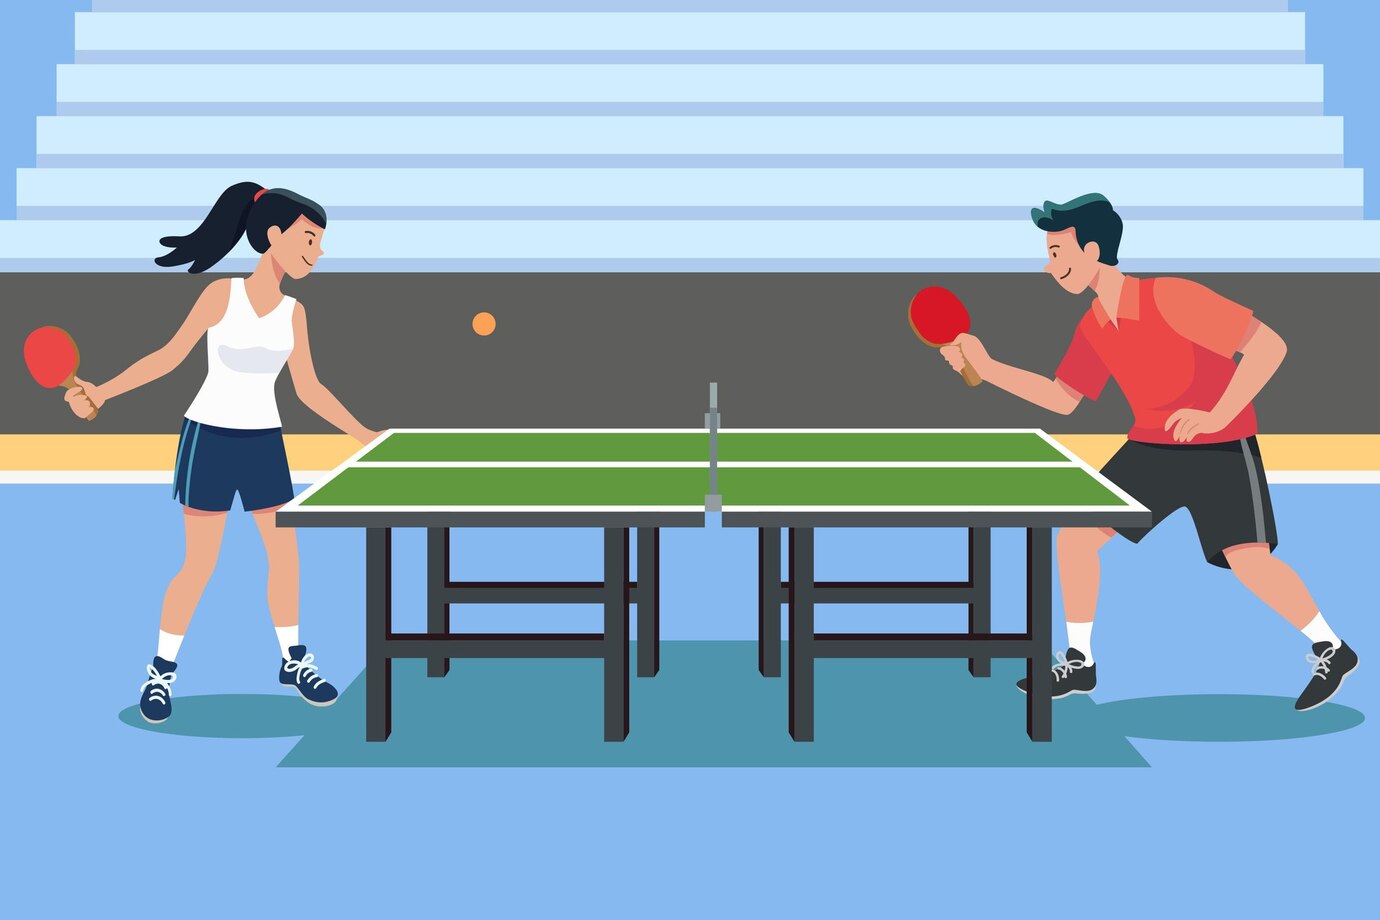 Table tennis betting strategies for doubles matches